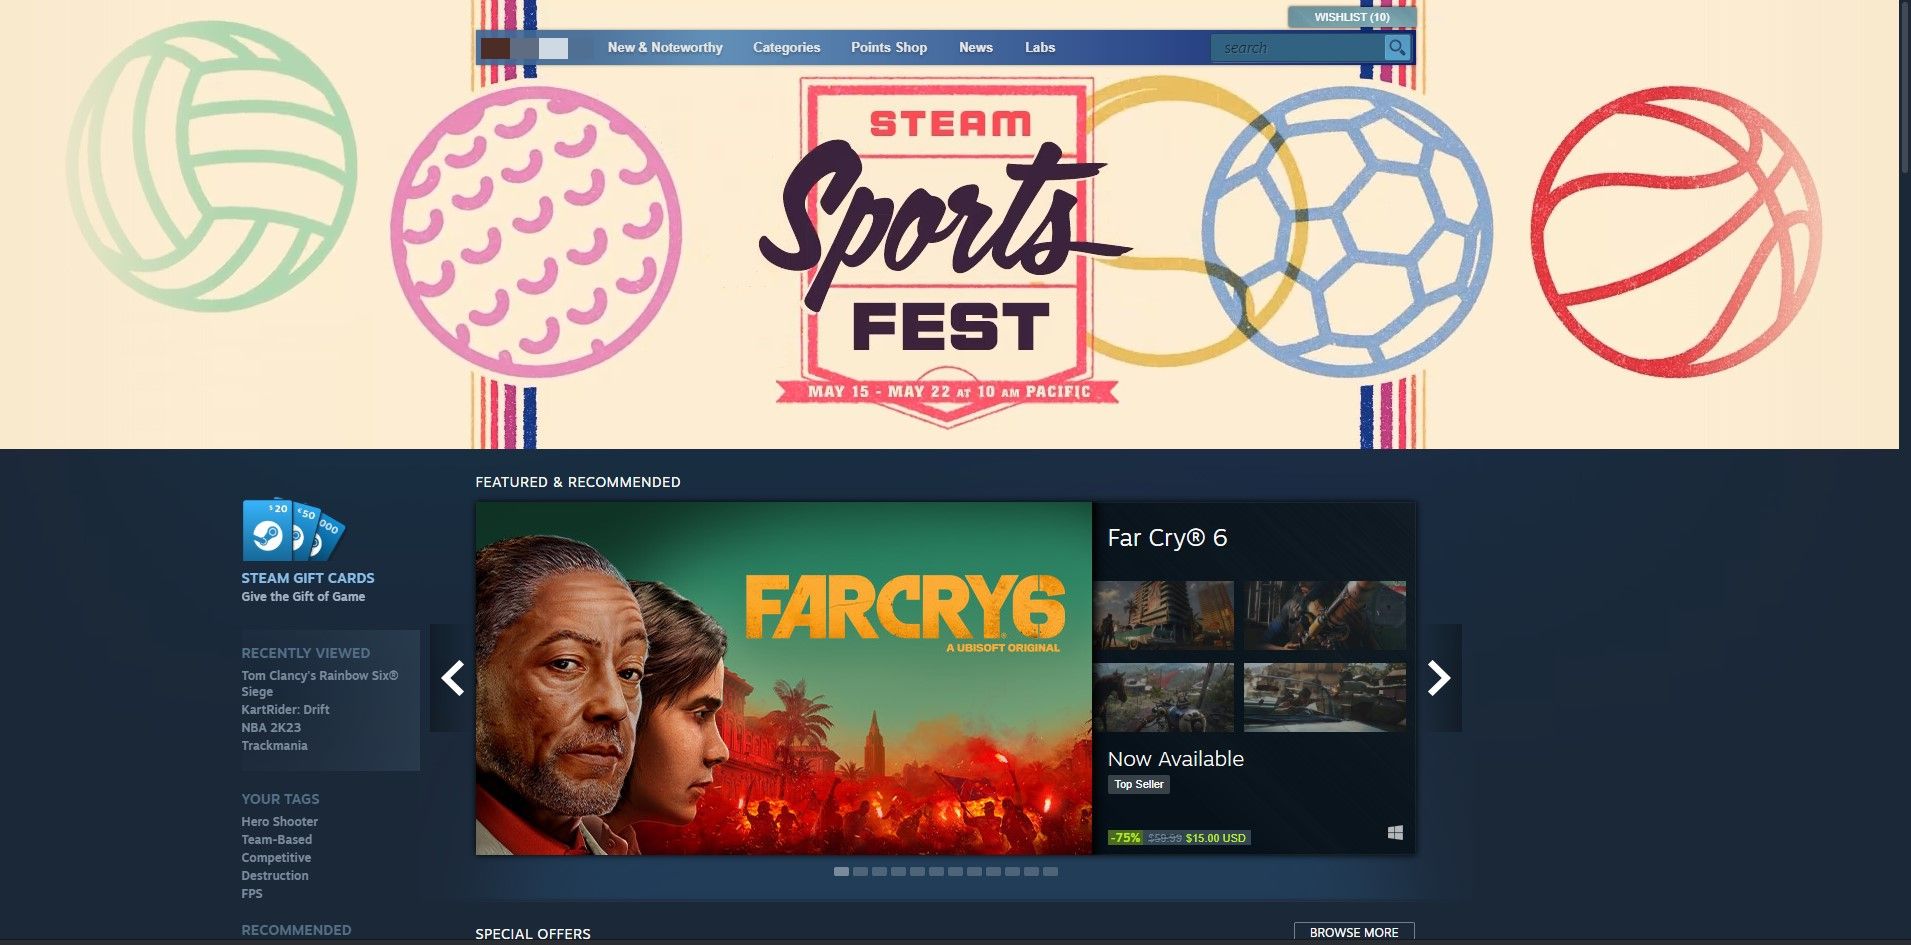 Screenshot Showing the Steam Home Page